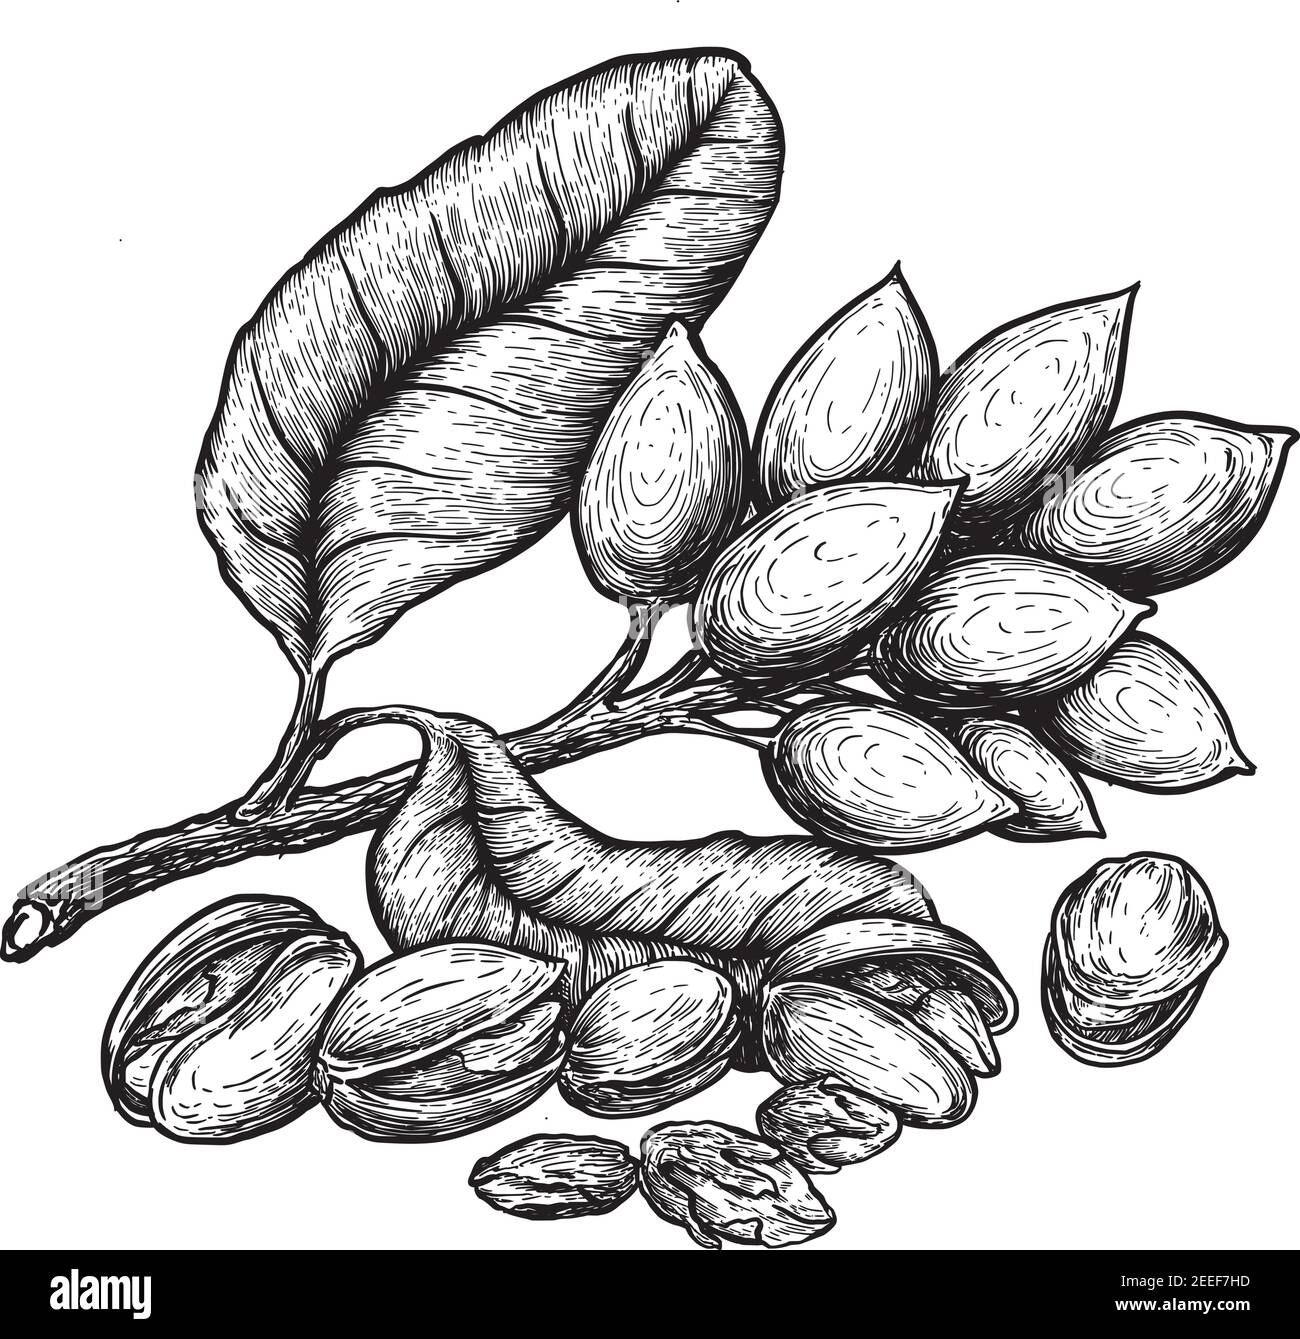 Pistachios and pistachio tree branch with nuts and leaves. Hand drawn sketches vector illustration on white background in vintage style. Stock Vector